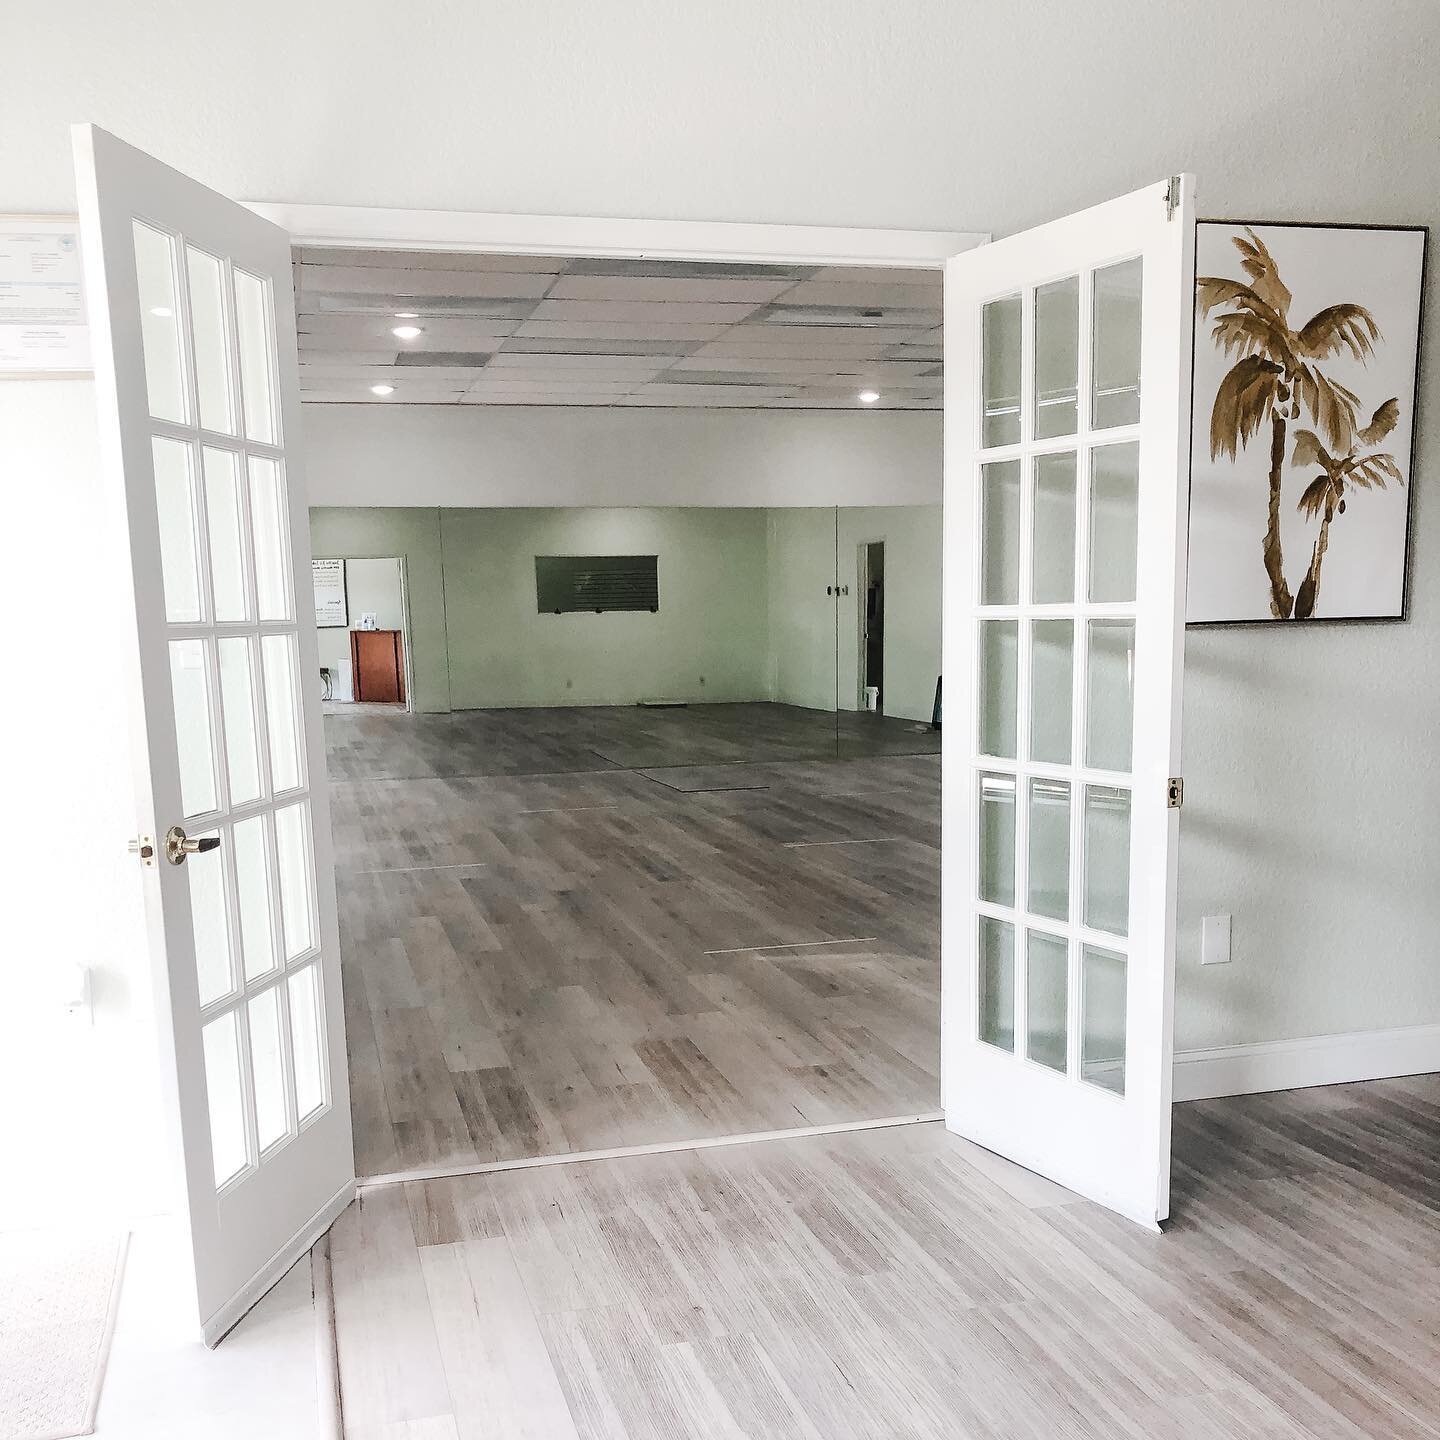 Hello, beautiful. We missed you 🤍

We&rsquo;ve added a few more beautiful things to our studio as well. Swipe to see the start of our @lululemon boutique.

We are safely reopening our studio Monday, May 18. Class size is limited, please register in 